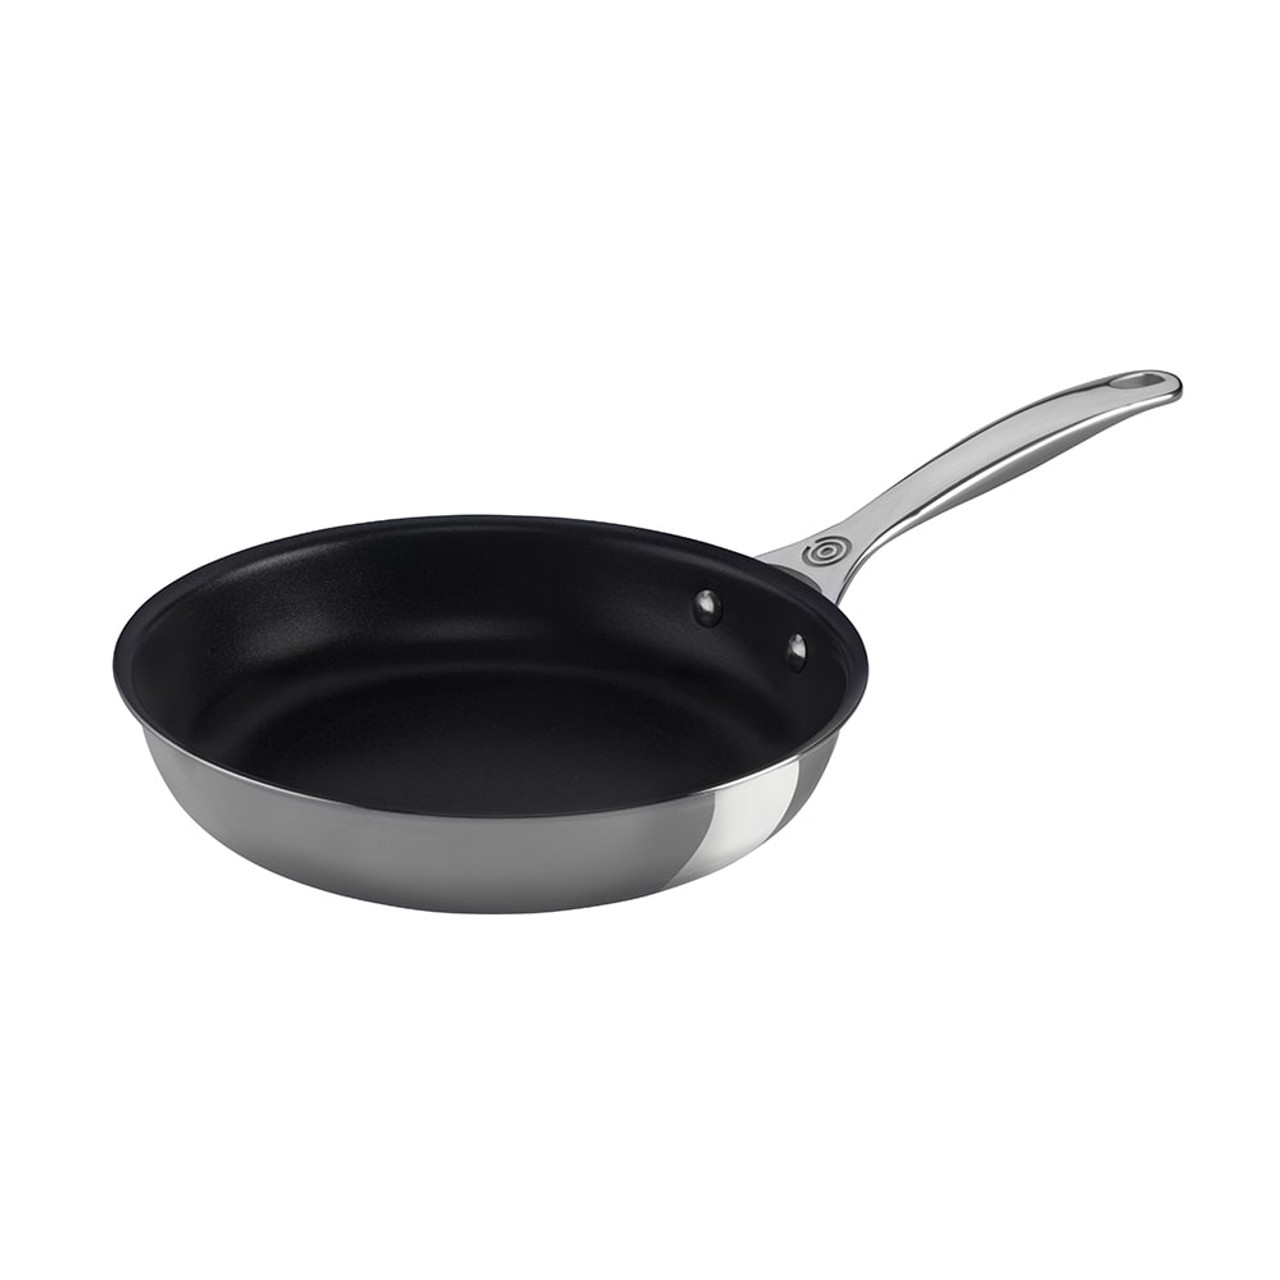 https://cdn11.bigcommerce.com/s-hccytny0od/images/stencil/1280x1280/products/873/1417/le-creuset-nonstick-stainless-steel-deep-fry-pan-9-inch__45371.1588301118.jpg?c=2?imbypass=on